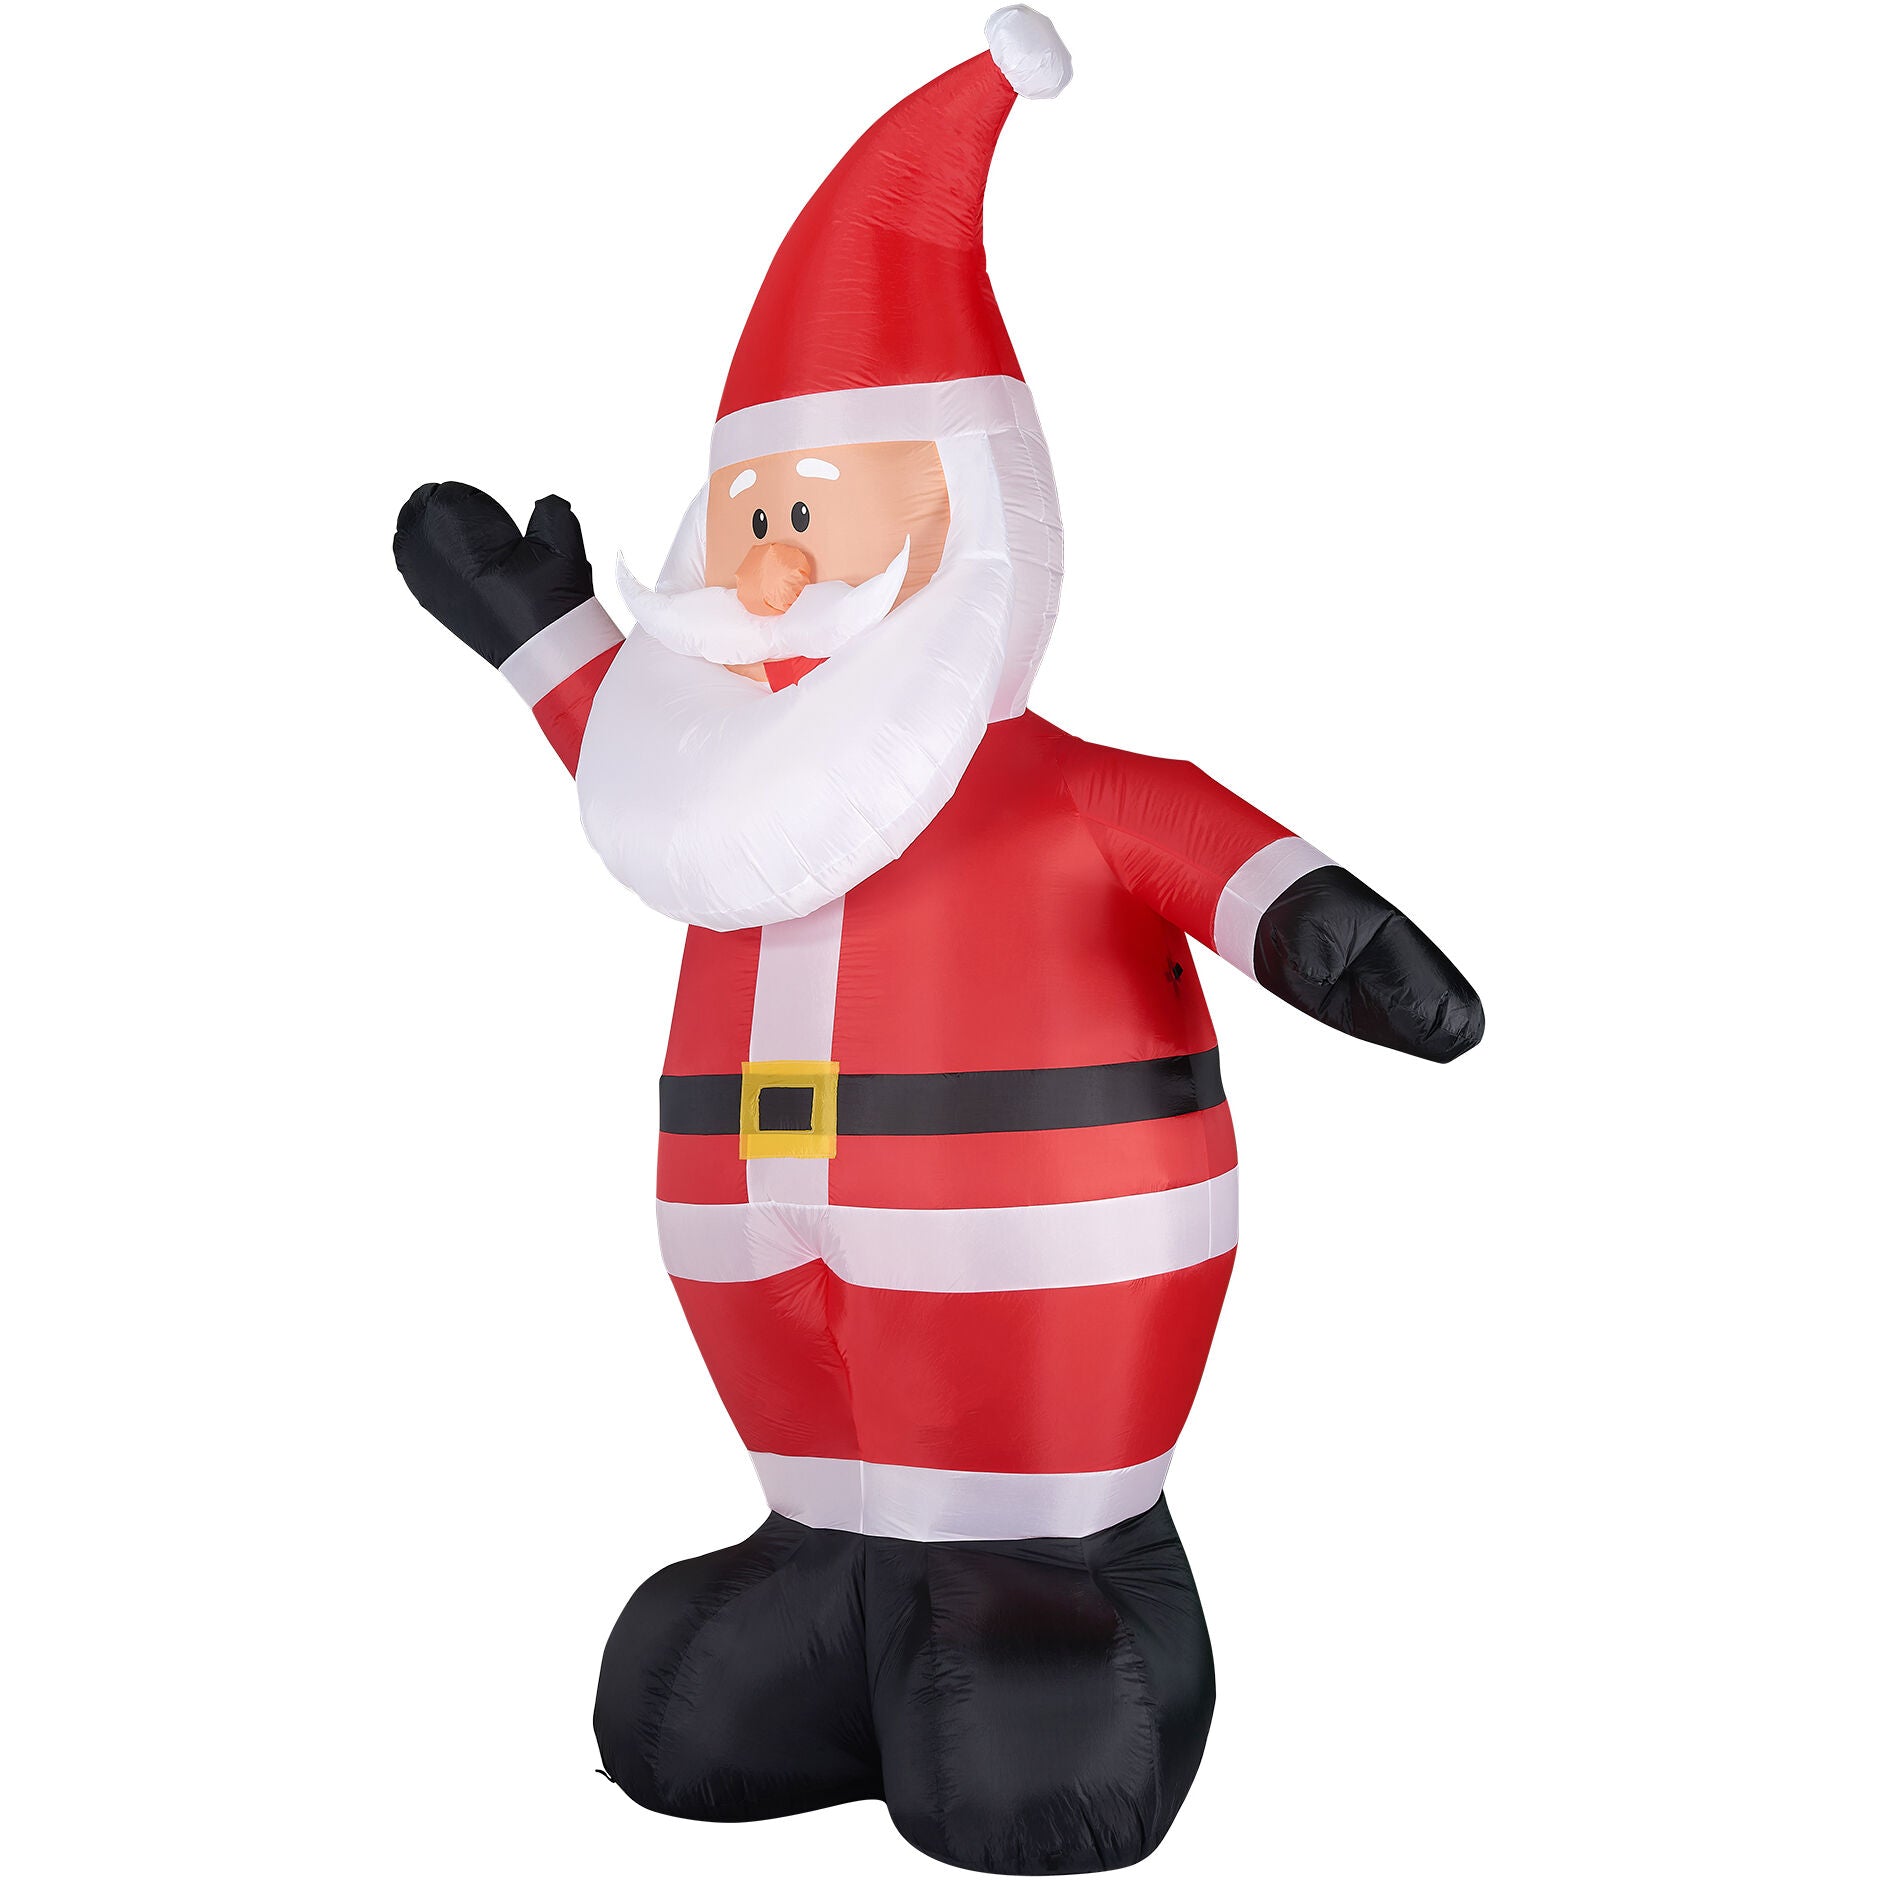 Fraser Hill Farm -  12-Ft. Tall Traditional Santa Claus, Outdoor Blow-Up Christmas Inflatable with Lights and Storage Bag